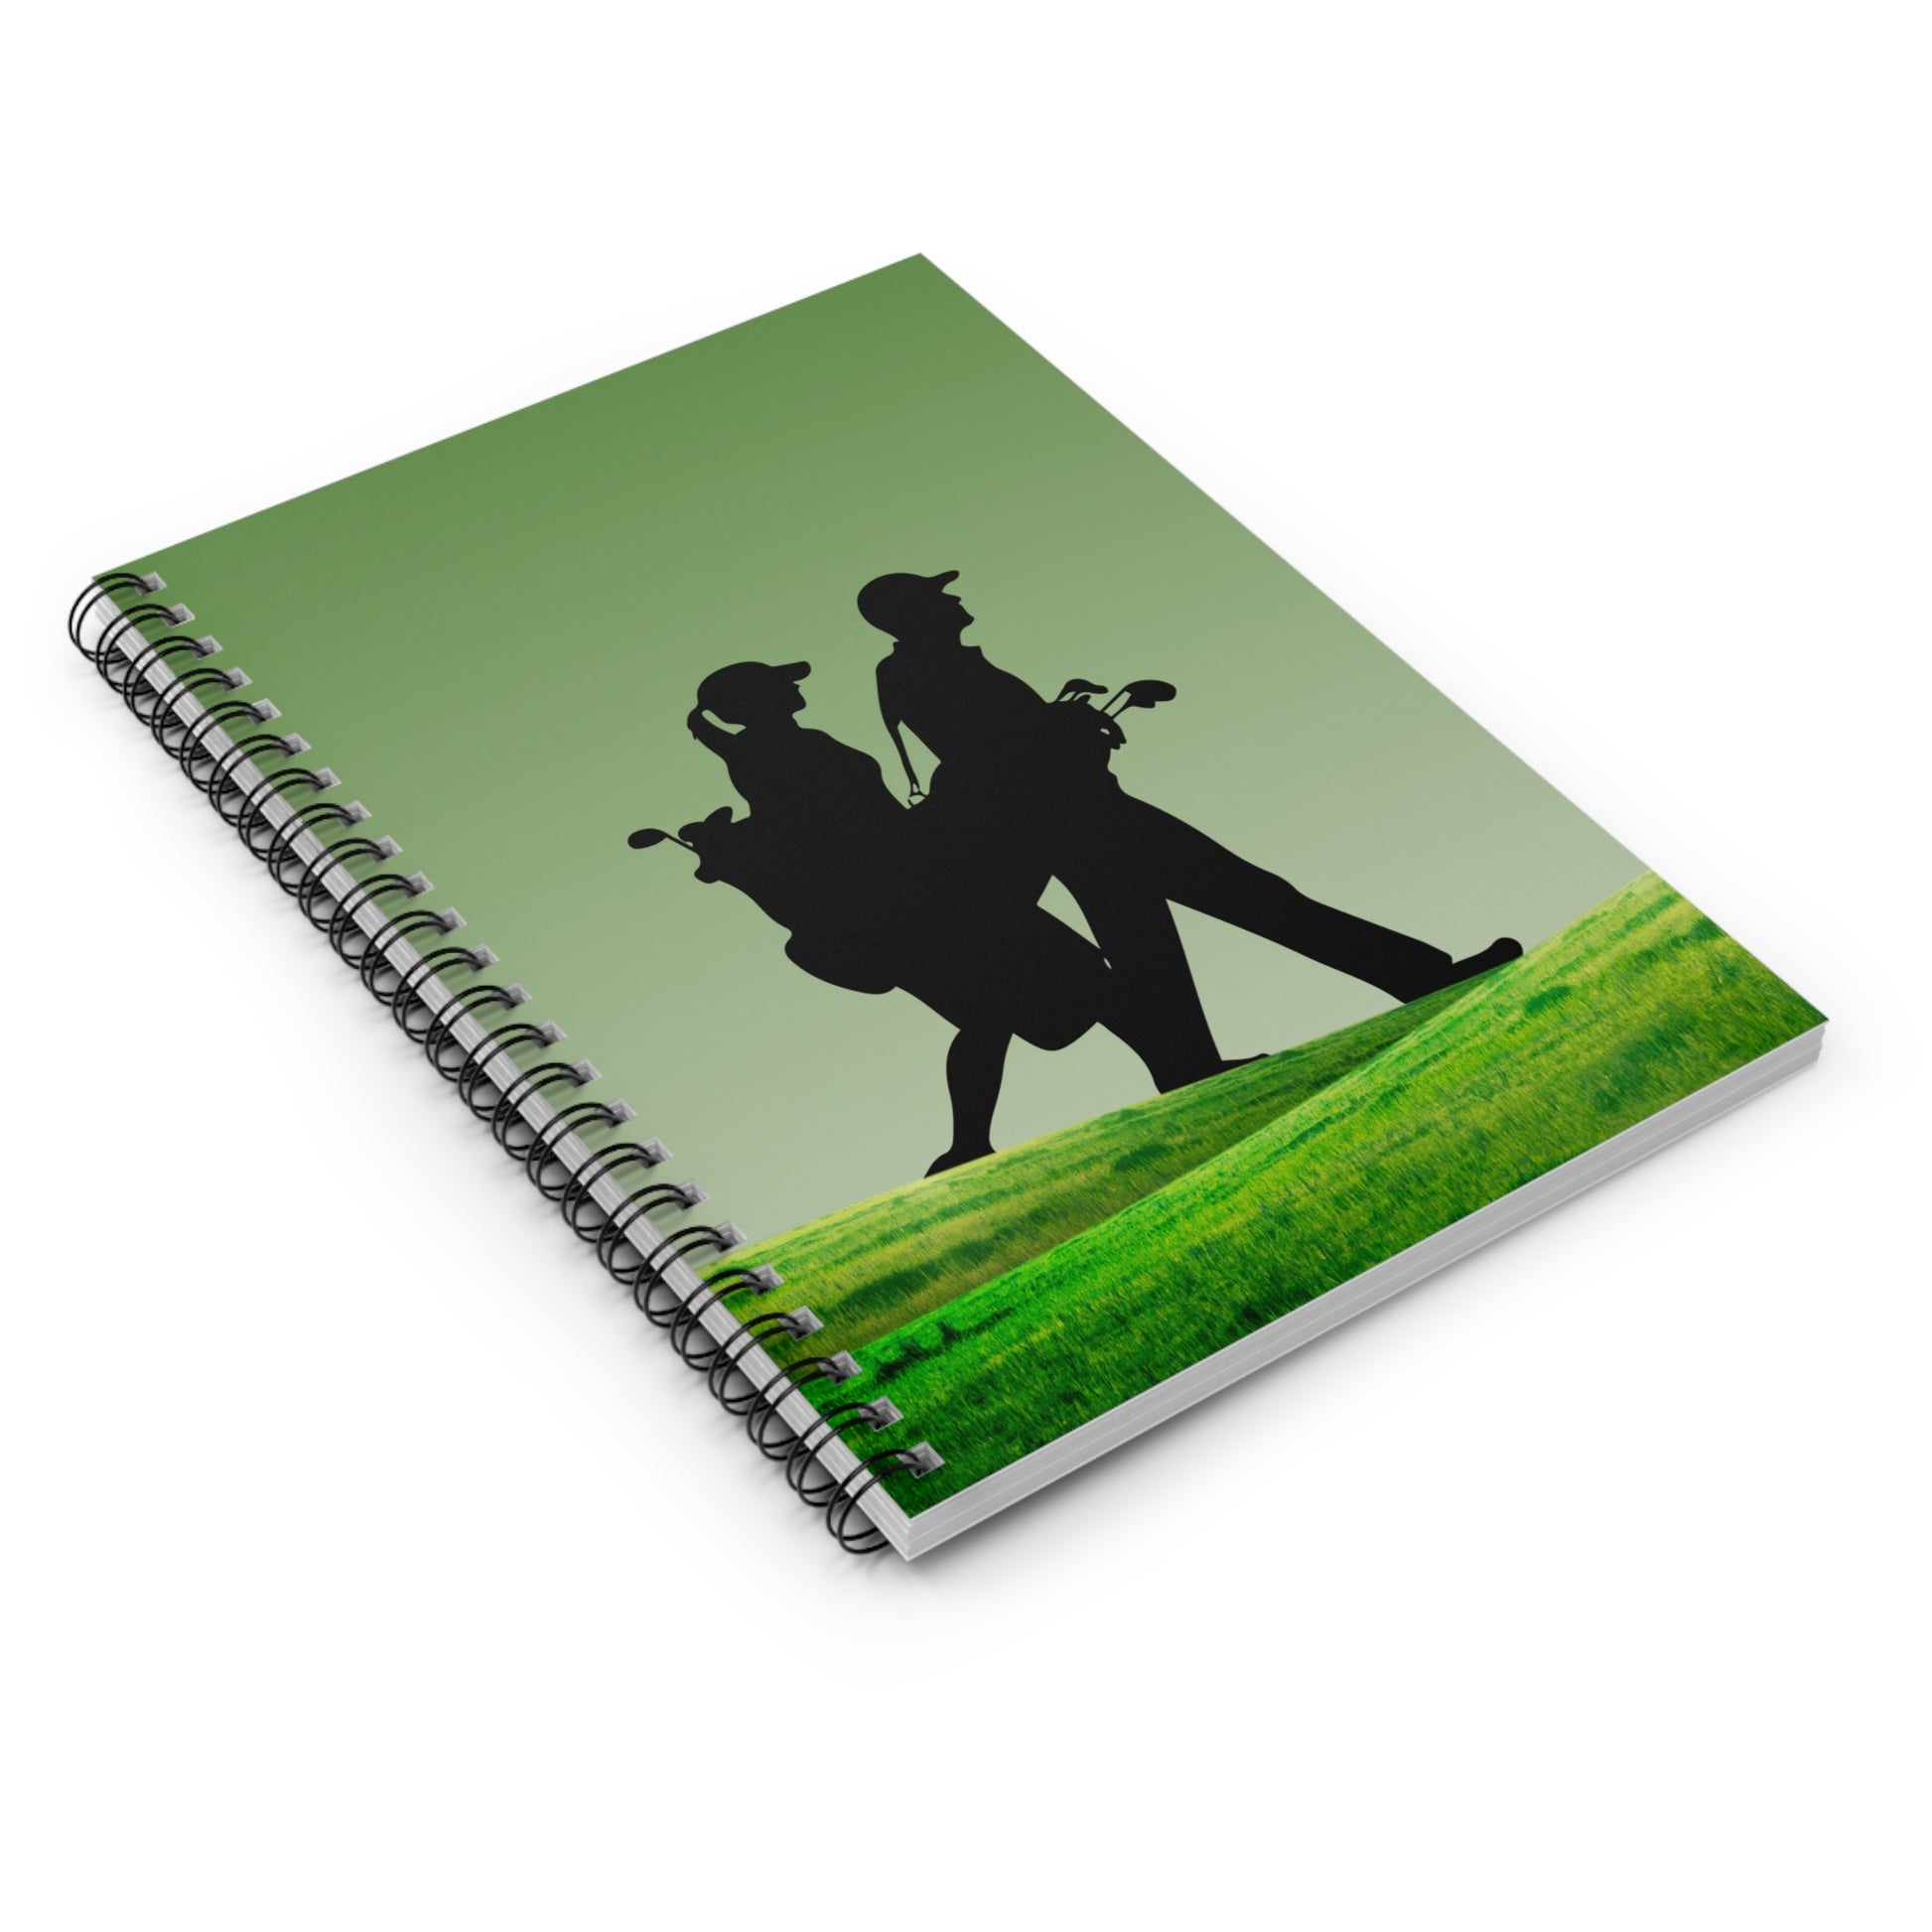 The Long Walk: Spiral Notebook - Log Books - Journals - Diaries - and More Custom Printed by TheGlassyLass